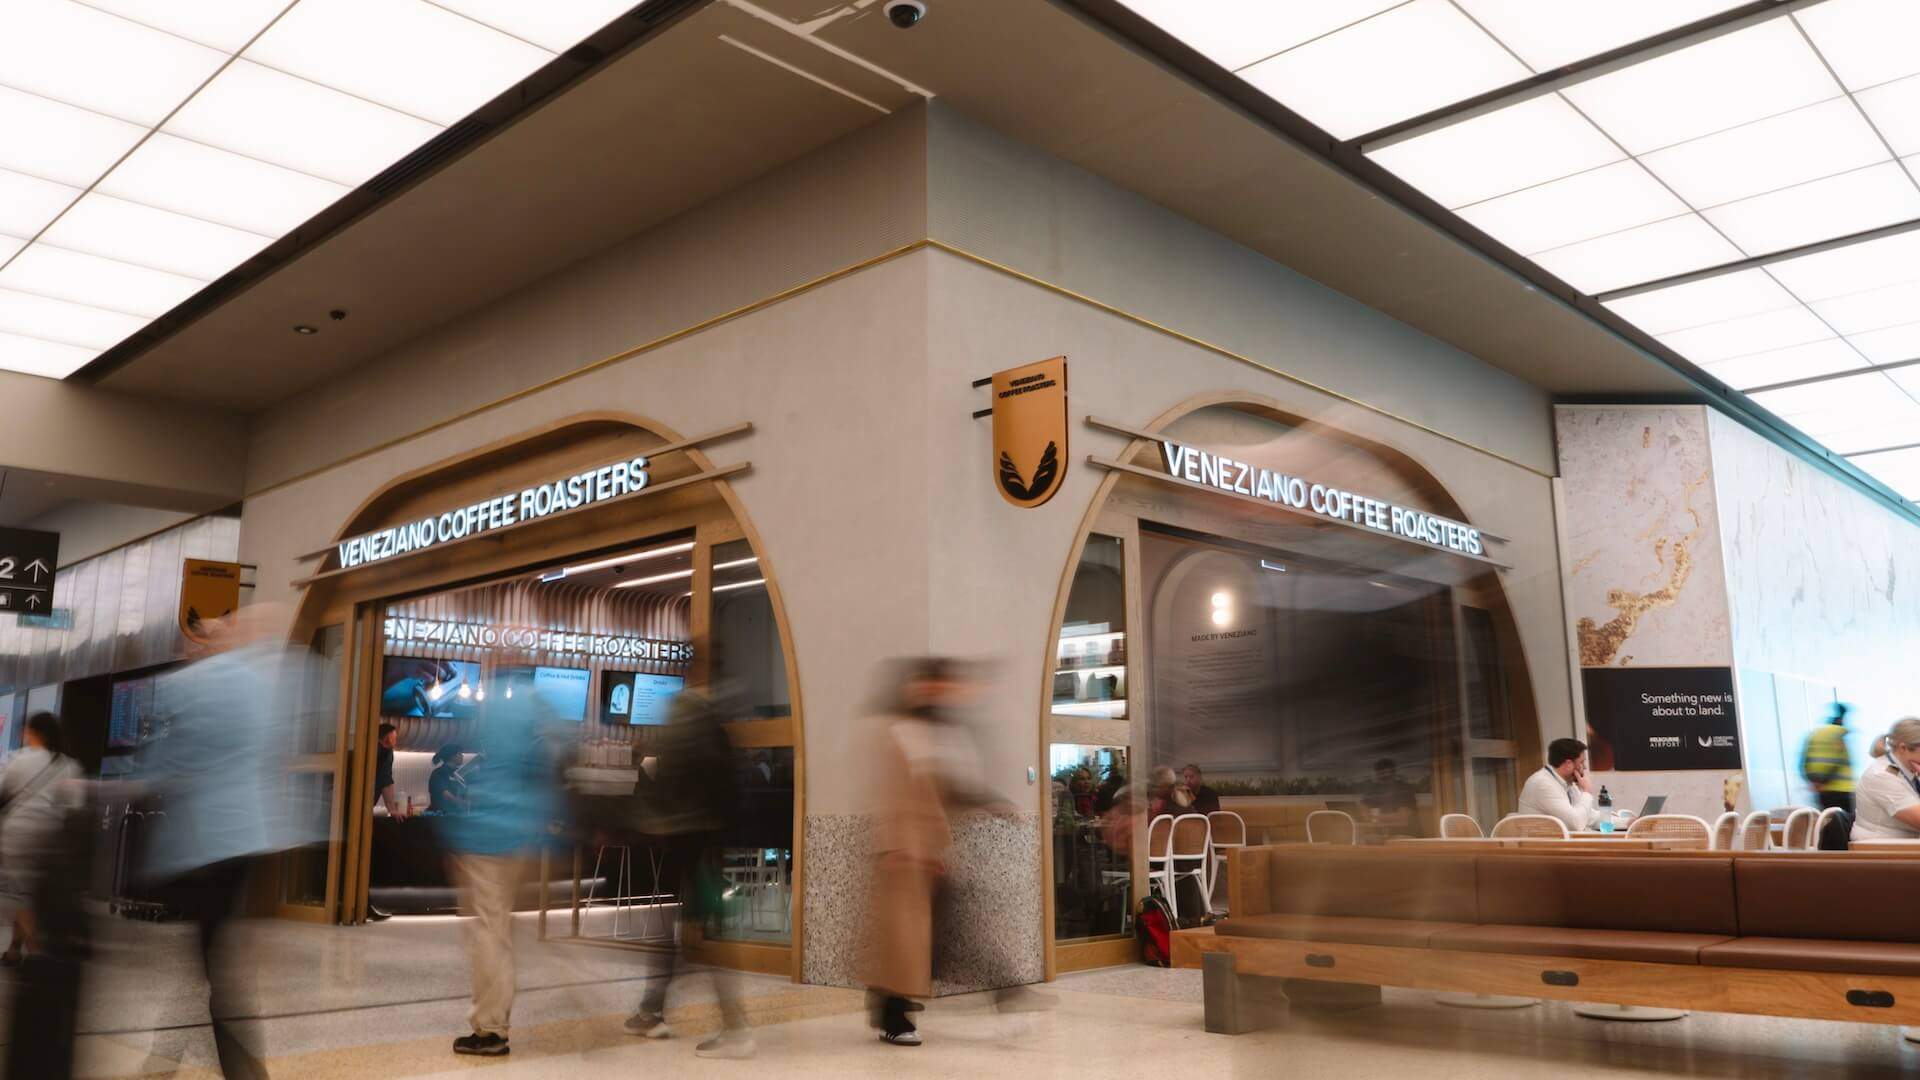 Richmond Coffee Roaster Veneziano Sets Up Shop in Melbourne Airport - Terminal 1.